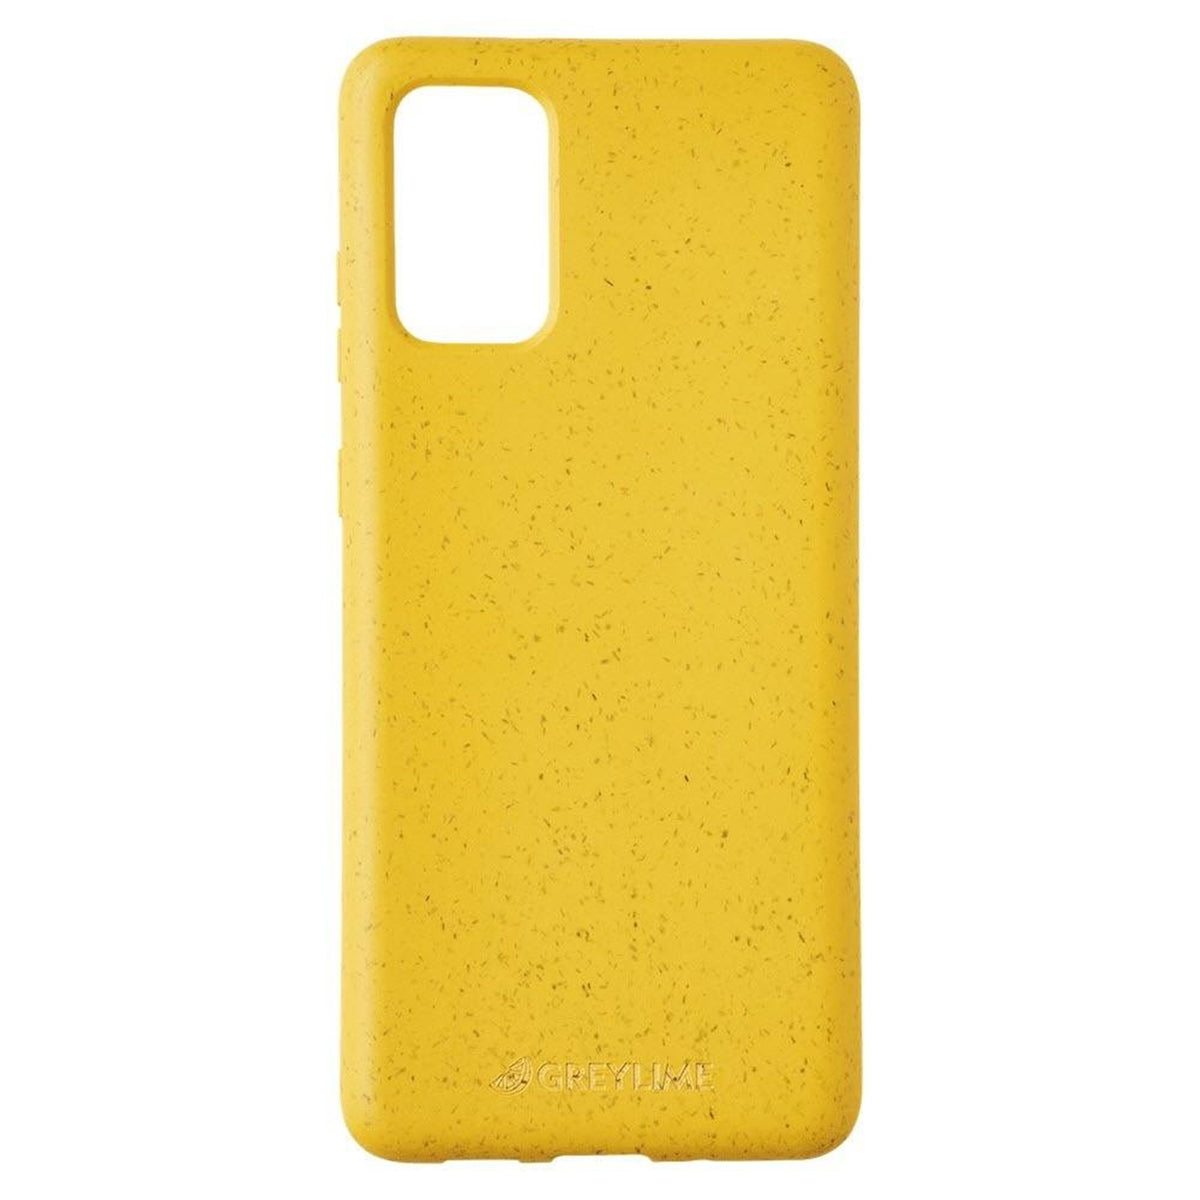 GreyLime-Samsung-Galaxy-S20-Biodegradable-Cover-Yellow-COSAM20P06-V3.jpg